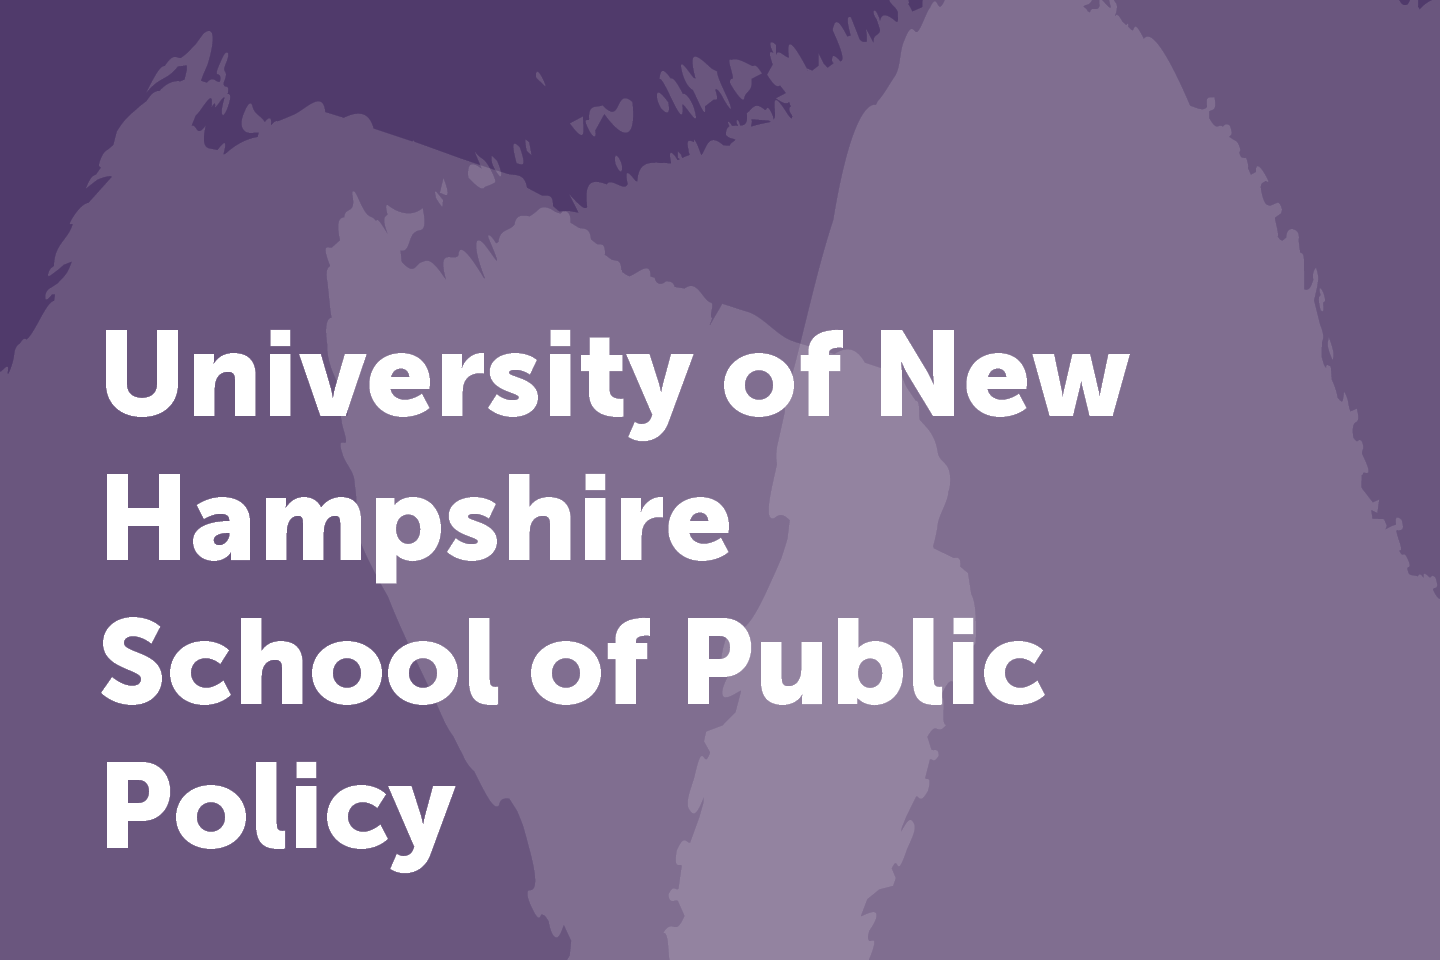 University of New Hampshire School of Public Policy